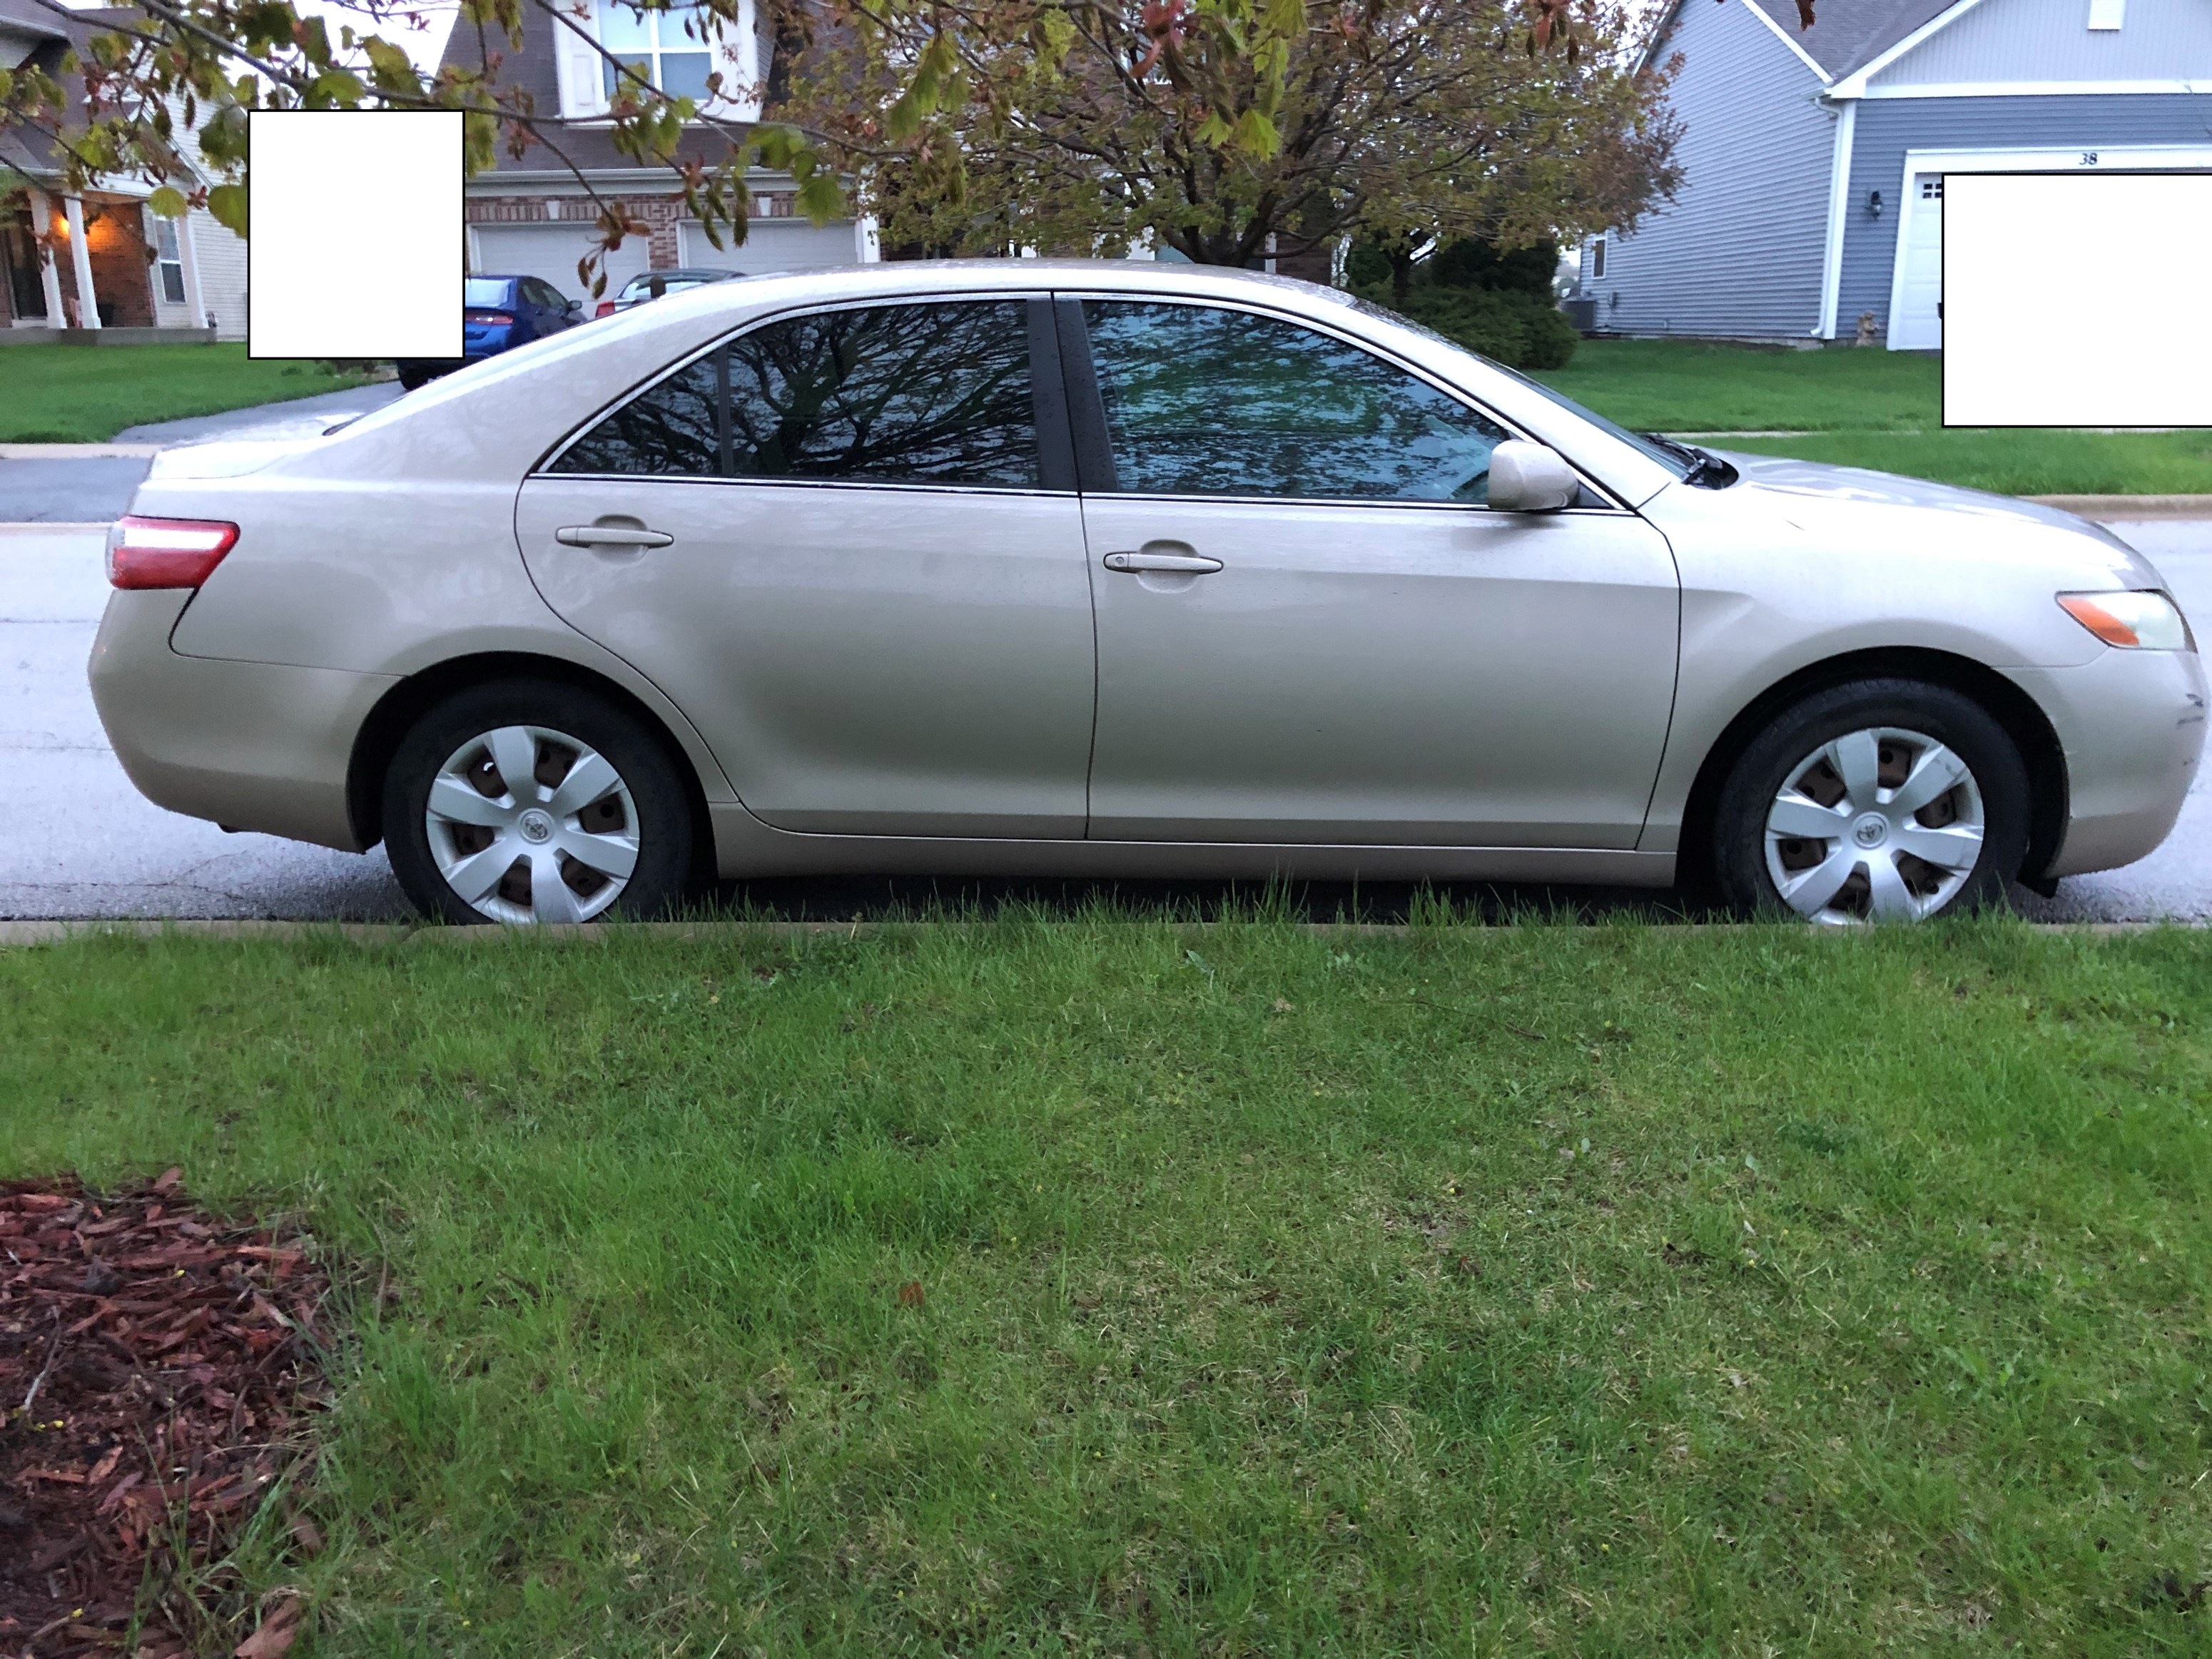 Toyota Camry CE 2007 For Sale - $5500, Used Toyota Camry Cars in ...